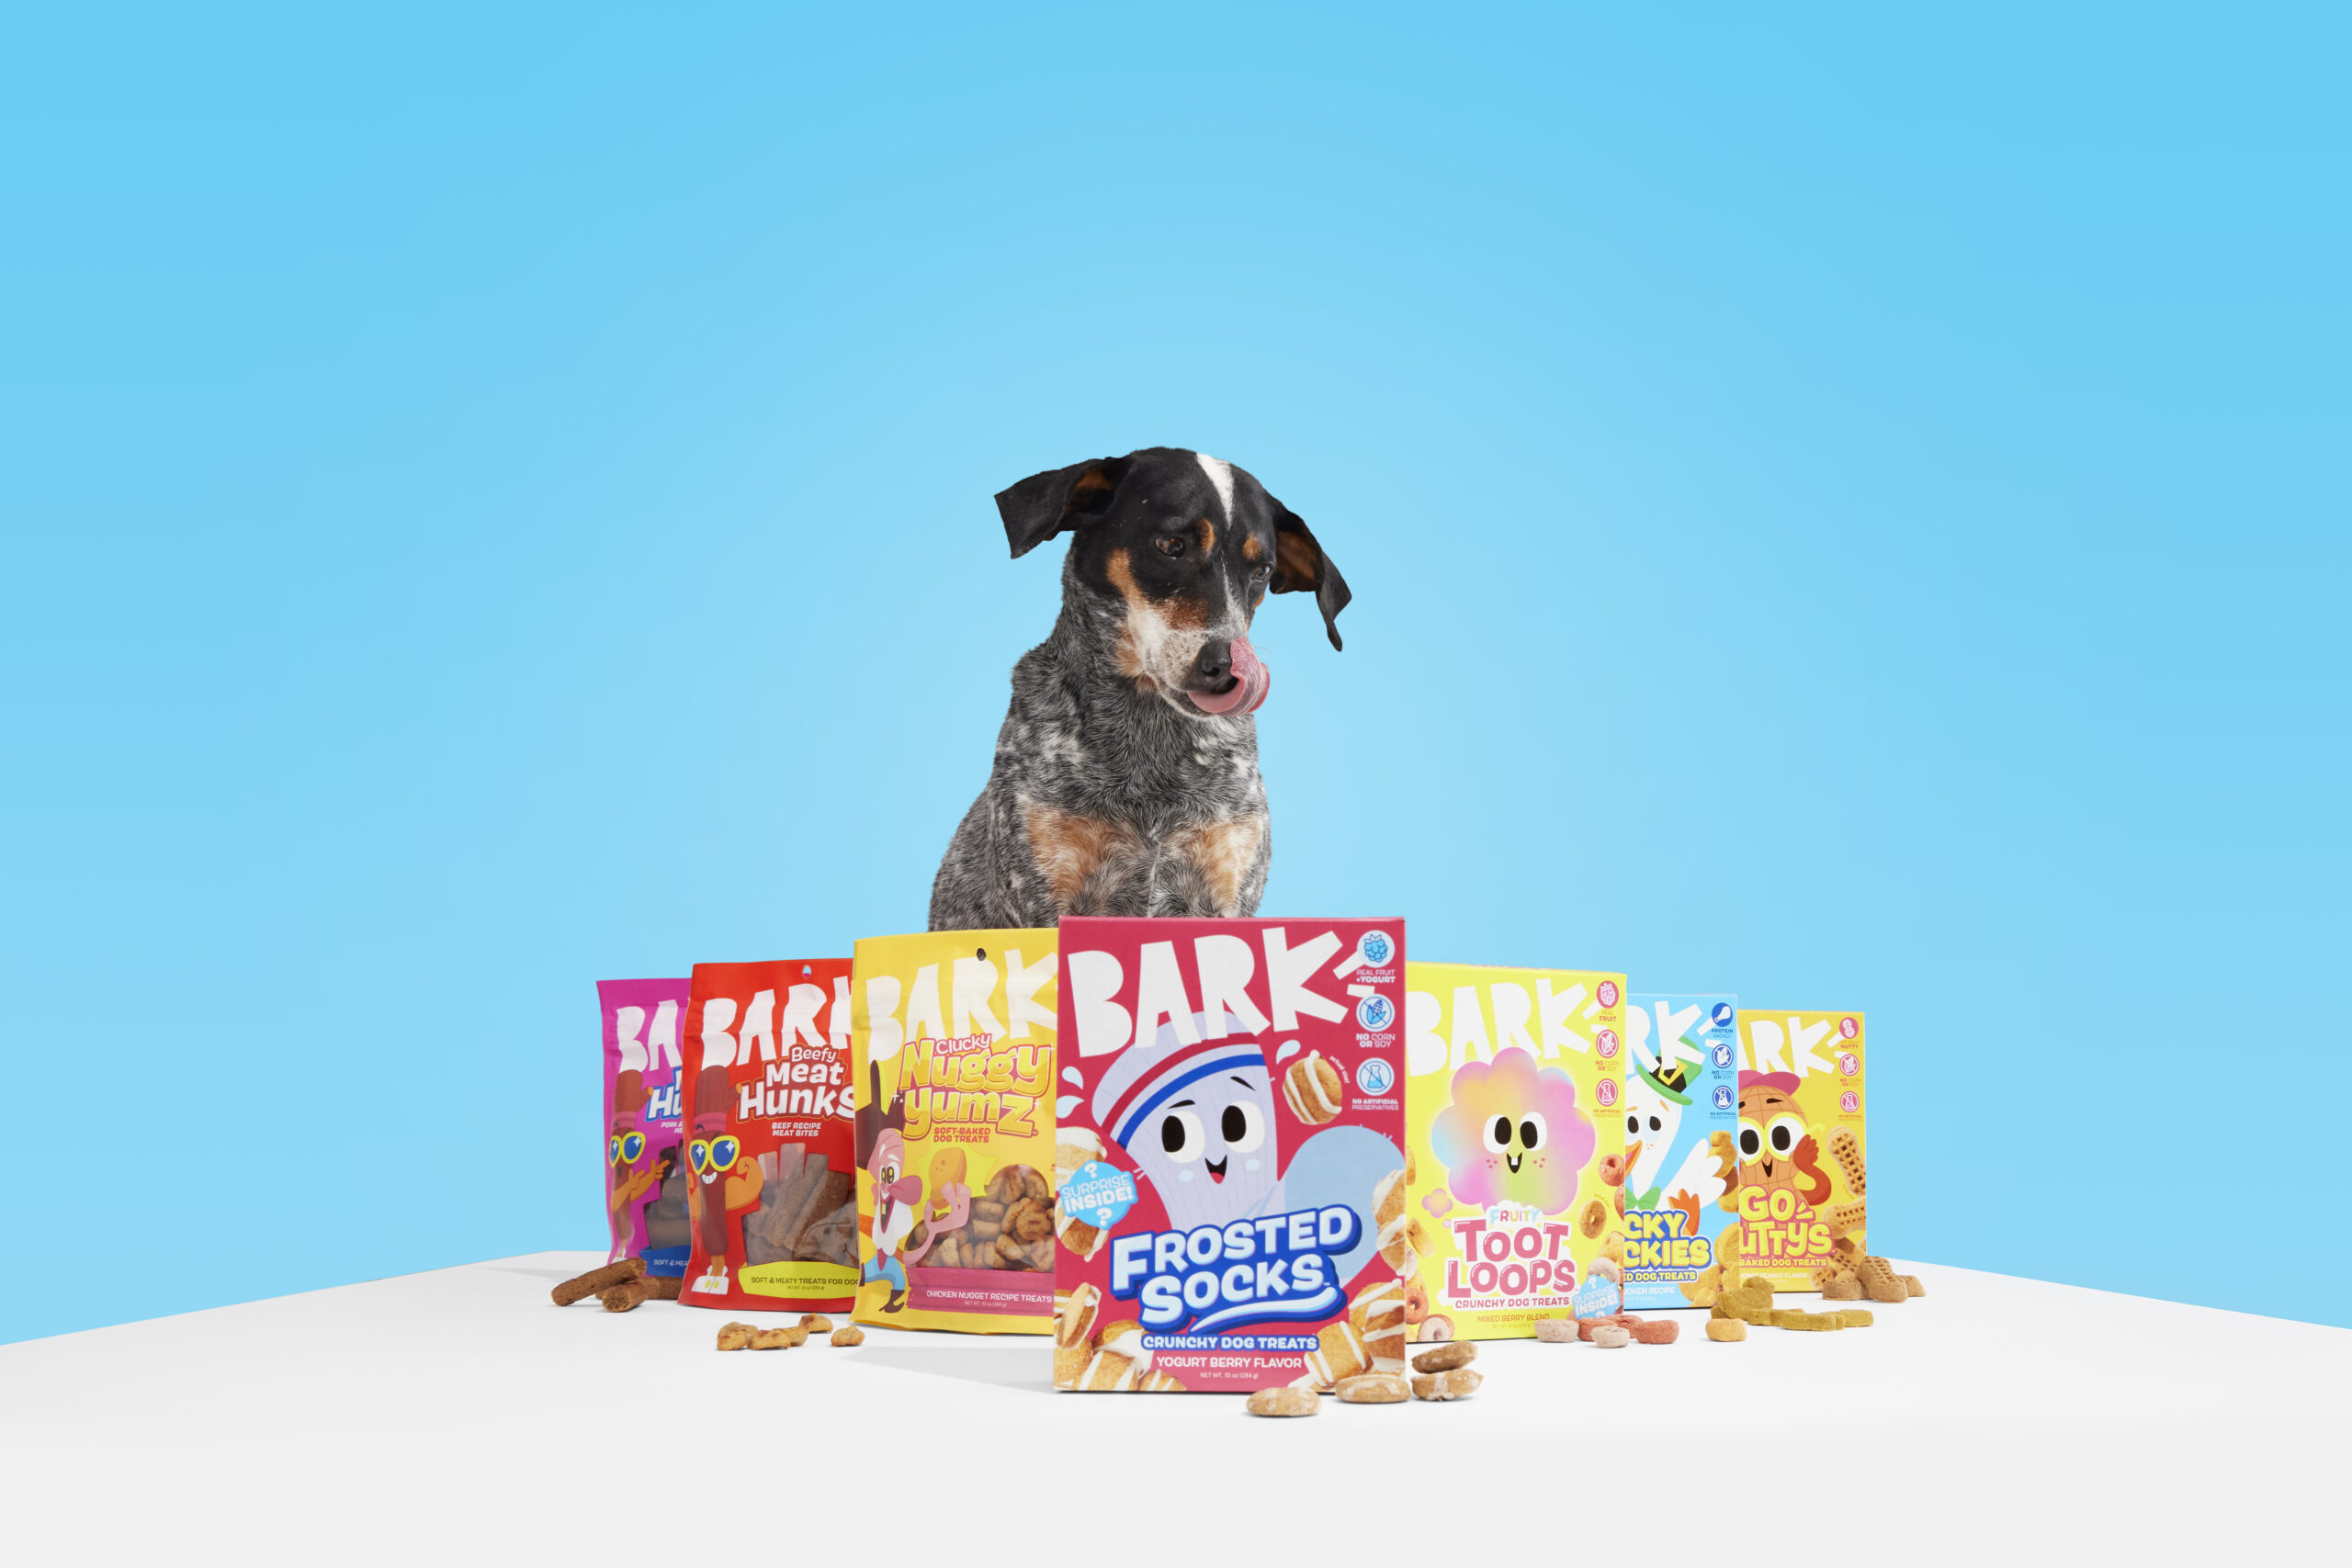 BARK's In-House Creative Team Designs Dog Treat Range Inspired by Classic Breakfast Cereals